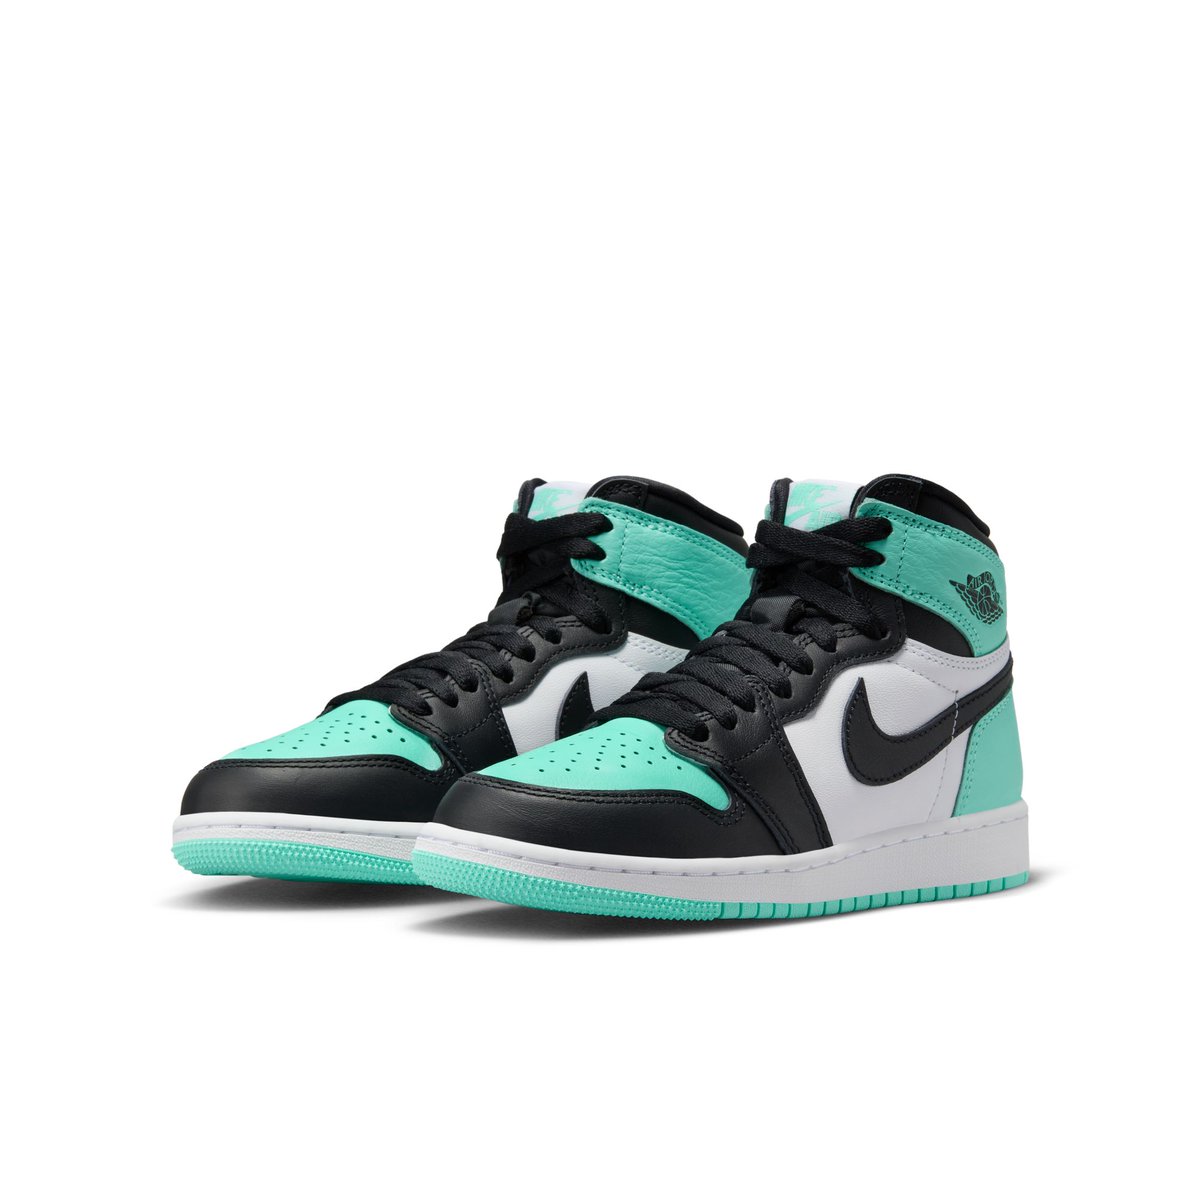 The Air Jordan 1 Retro High OG - 'Green Glow' is now available on our online store. Men's soleplayatl.com/products/mens-… Big Kid's soleplayatl.com/products/big-k…